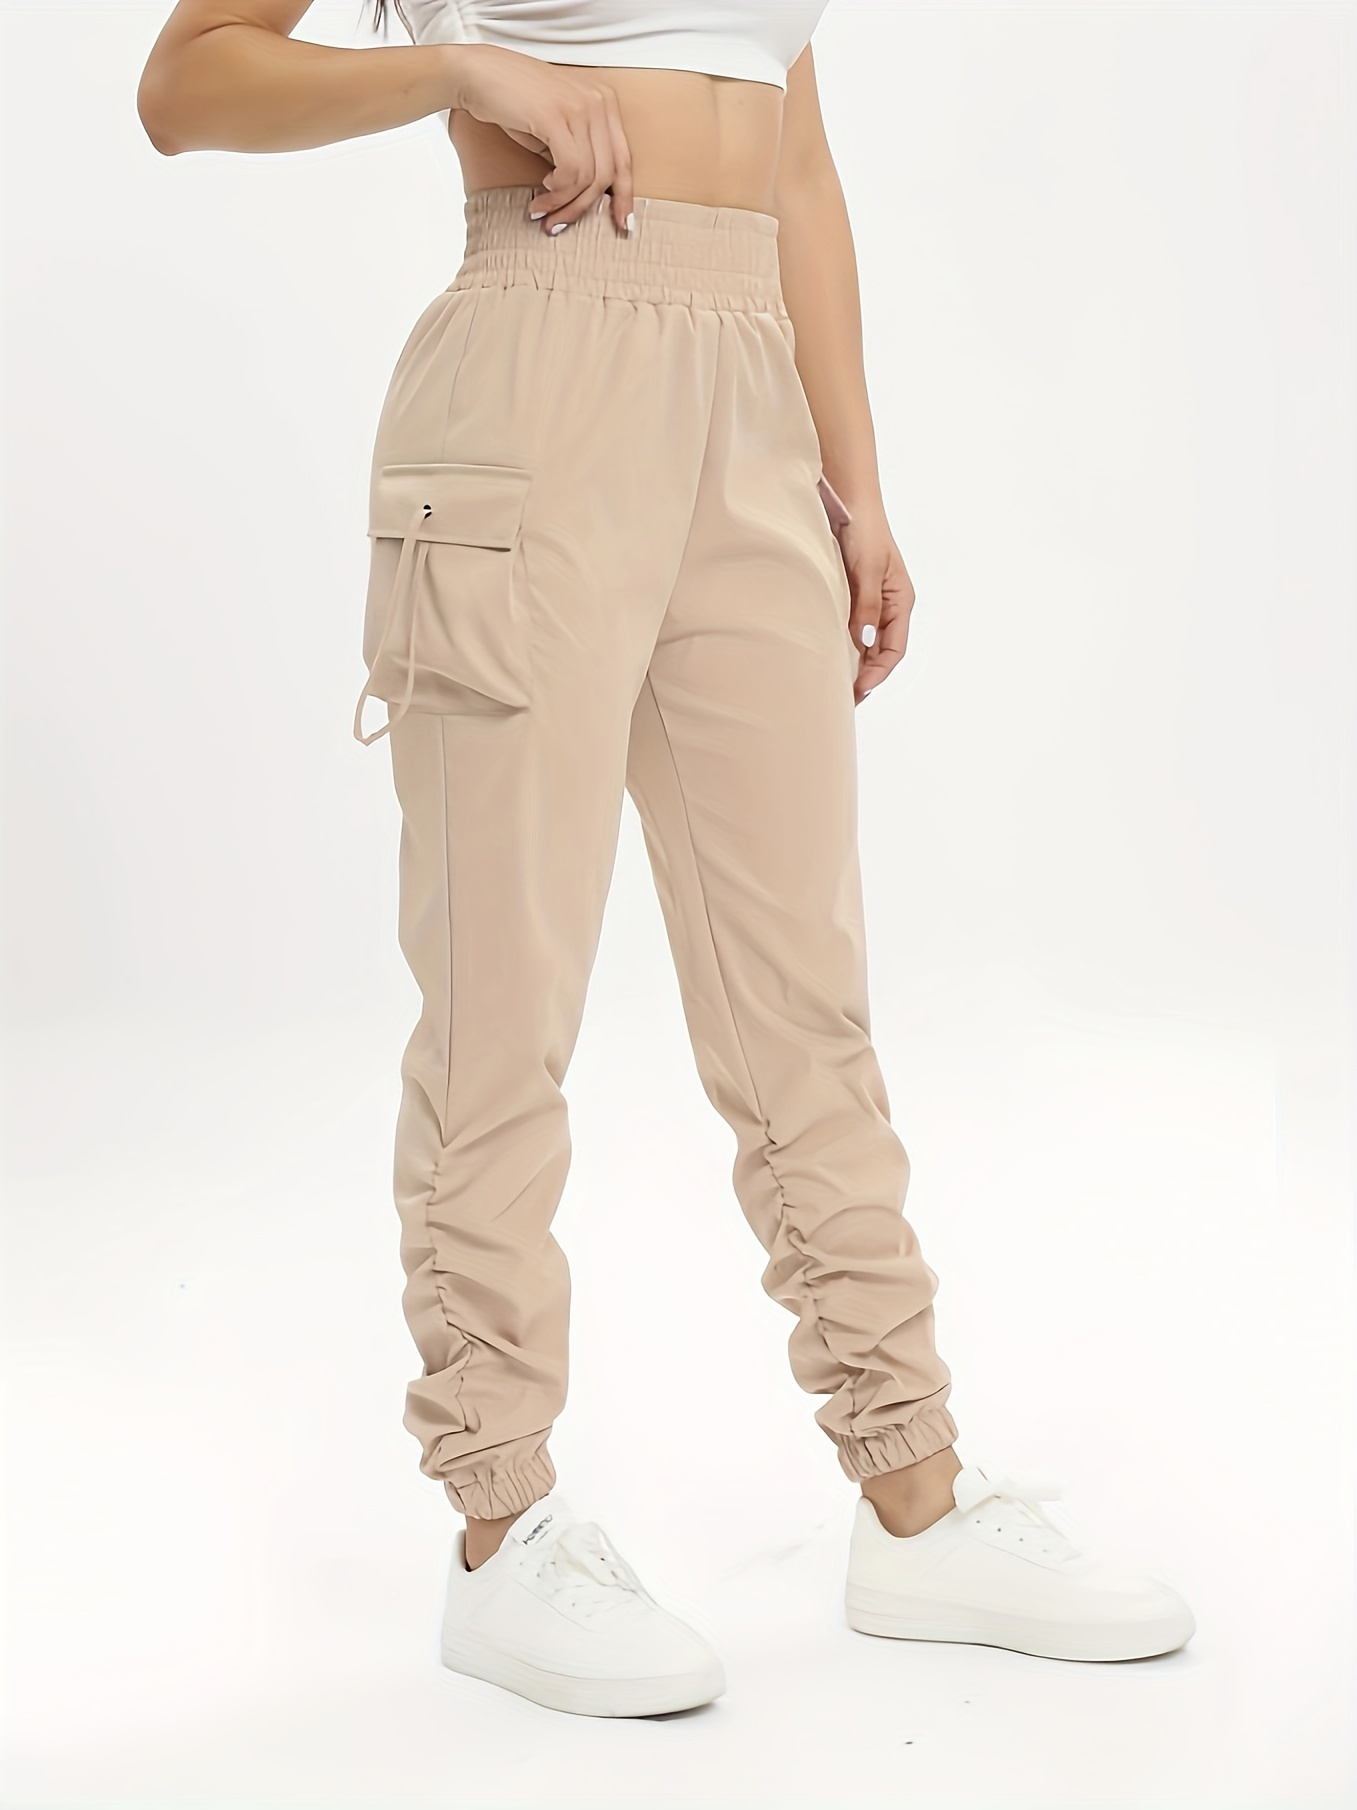 ruched solid cargo pants elegant high waist drawstring pants with pockets womens clothing details 11